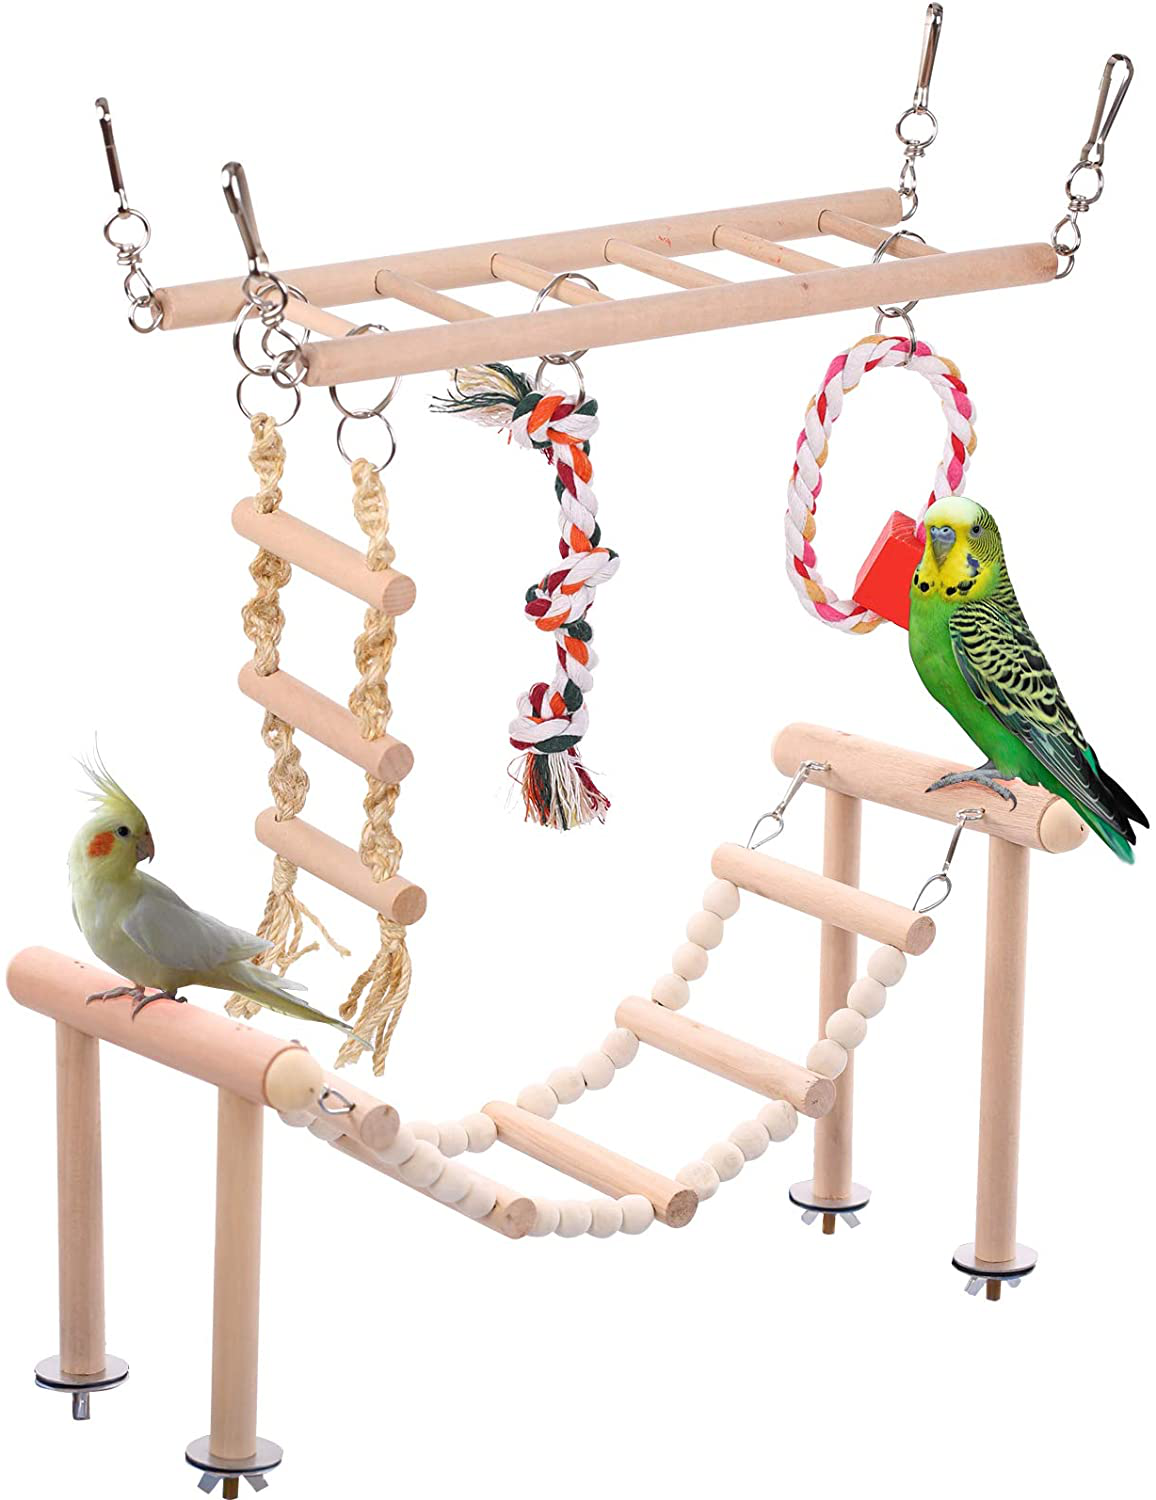 SAWMONG Bird Parrot Toys Bird Perch Stand Pet Birds Swing Climbing Ladder with Chewing Toys Playground Accessories for Small Parakeets Cockatiels Conures Lovebirds